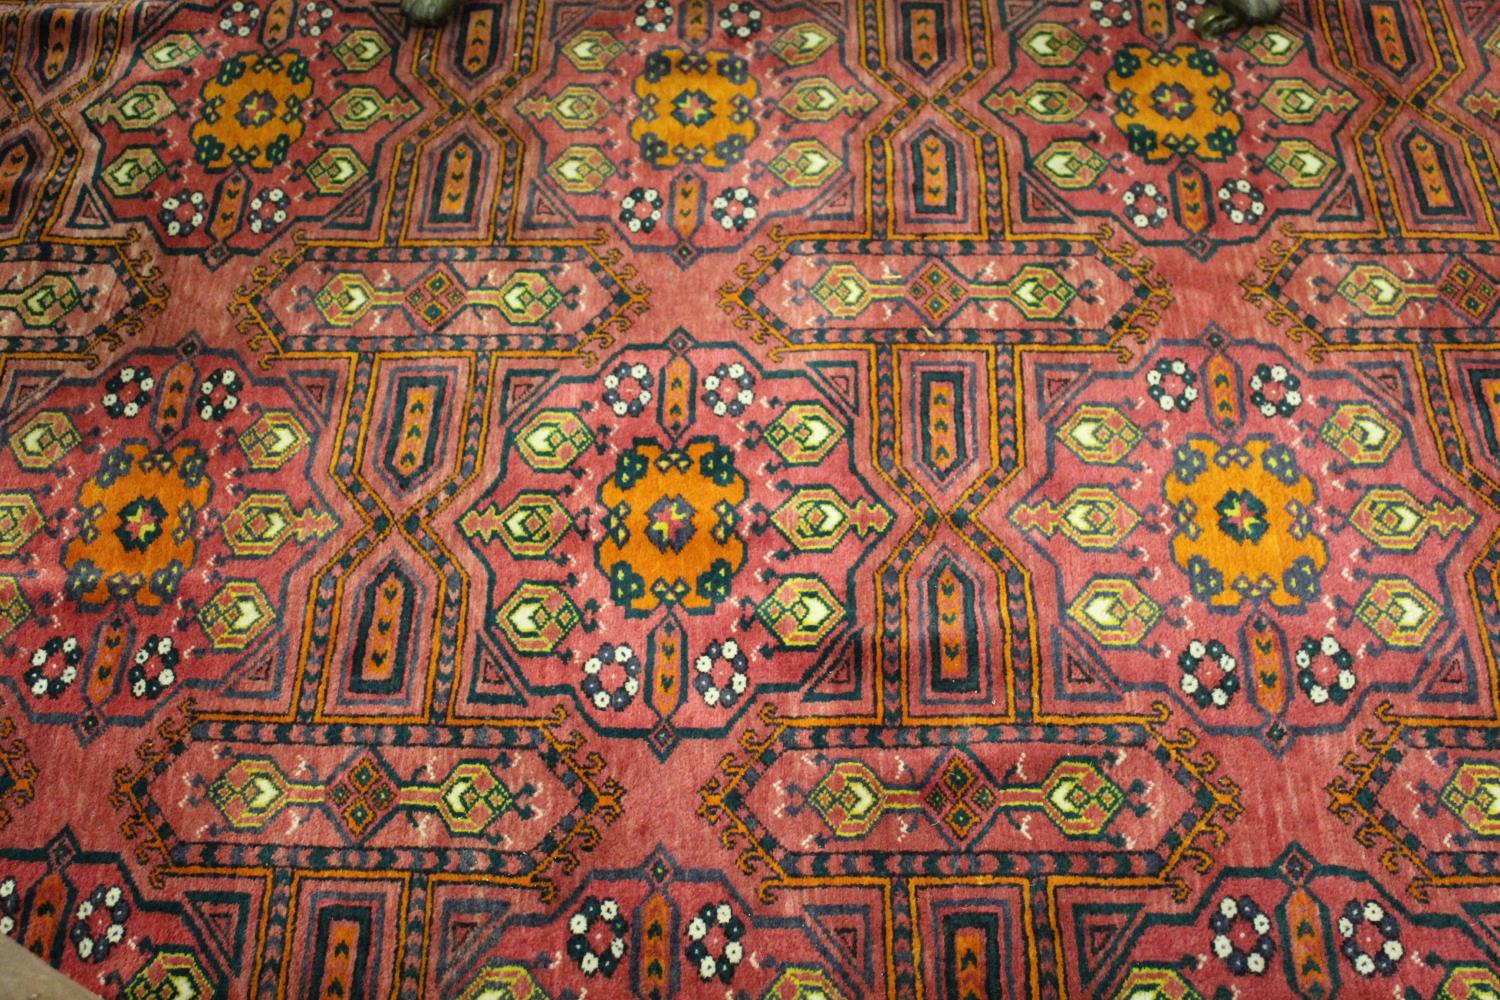 Afghan carpet with three rows of six gols on a wine ground with borders, 11ft x 7ft approximately